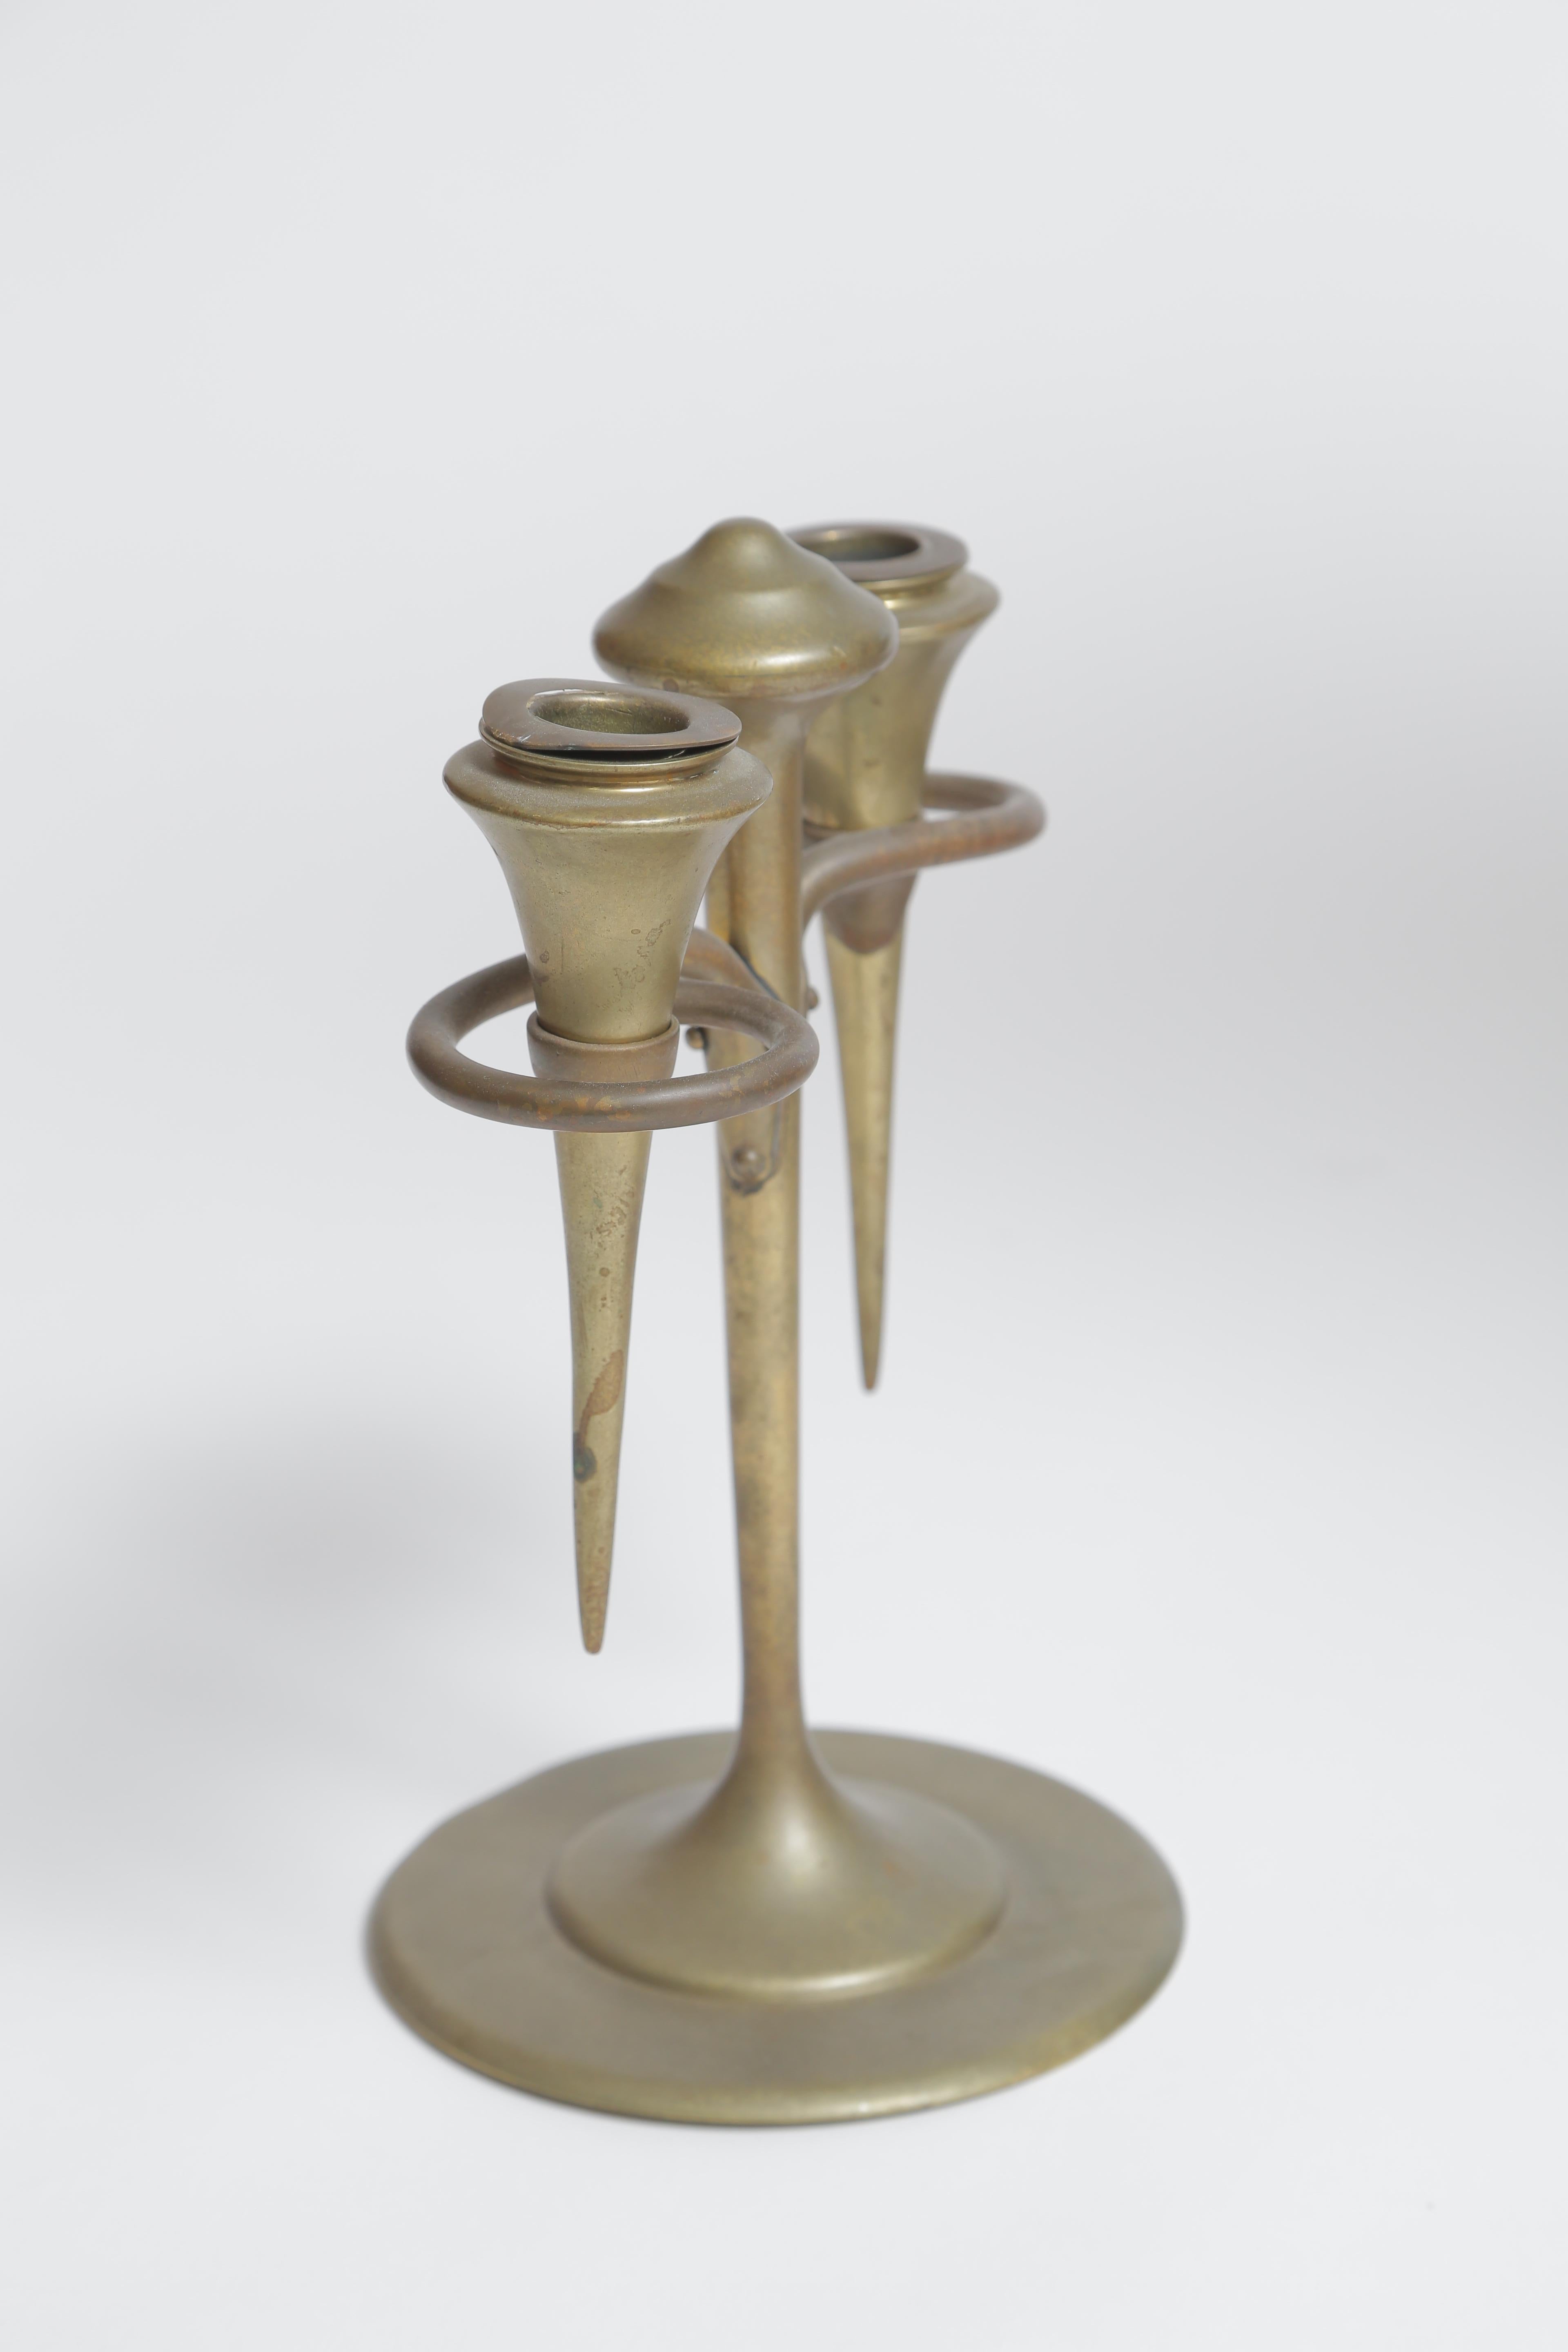 Robert Jarvie Omicron Two-Branch Candlestick In Good Condition For Sale In West Palm Beach, FL